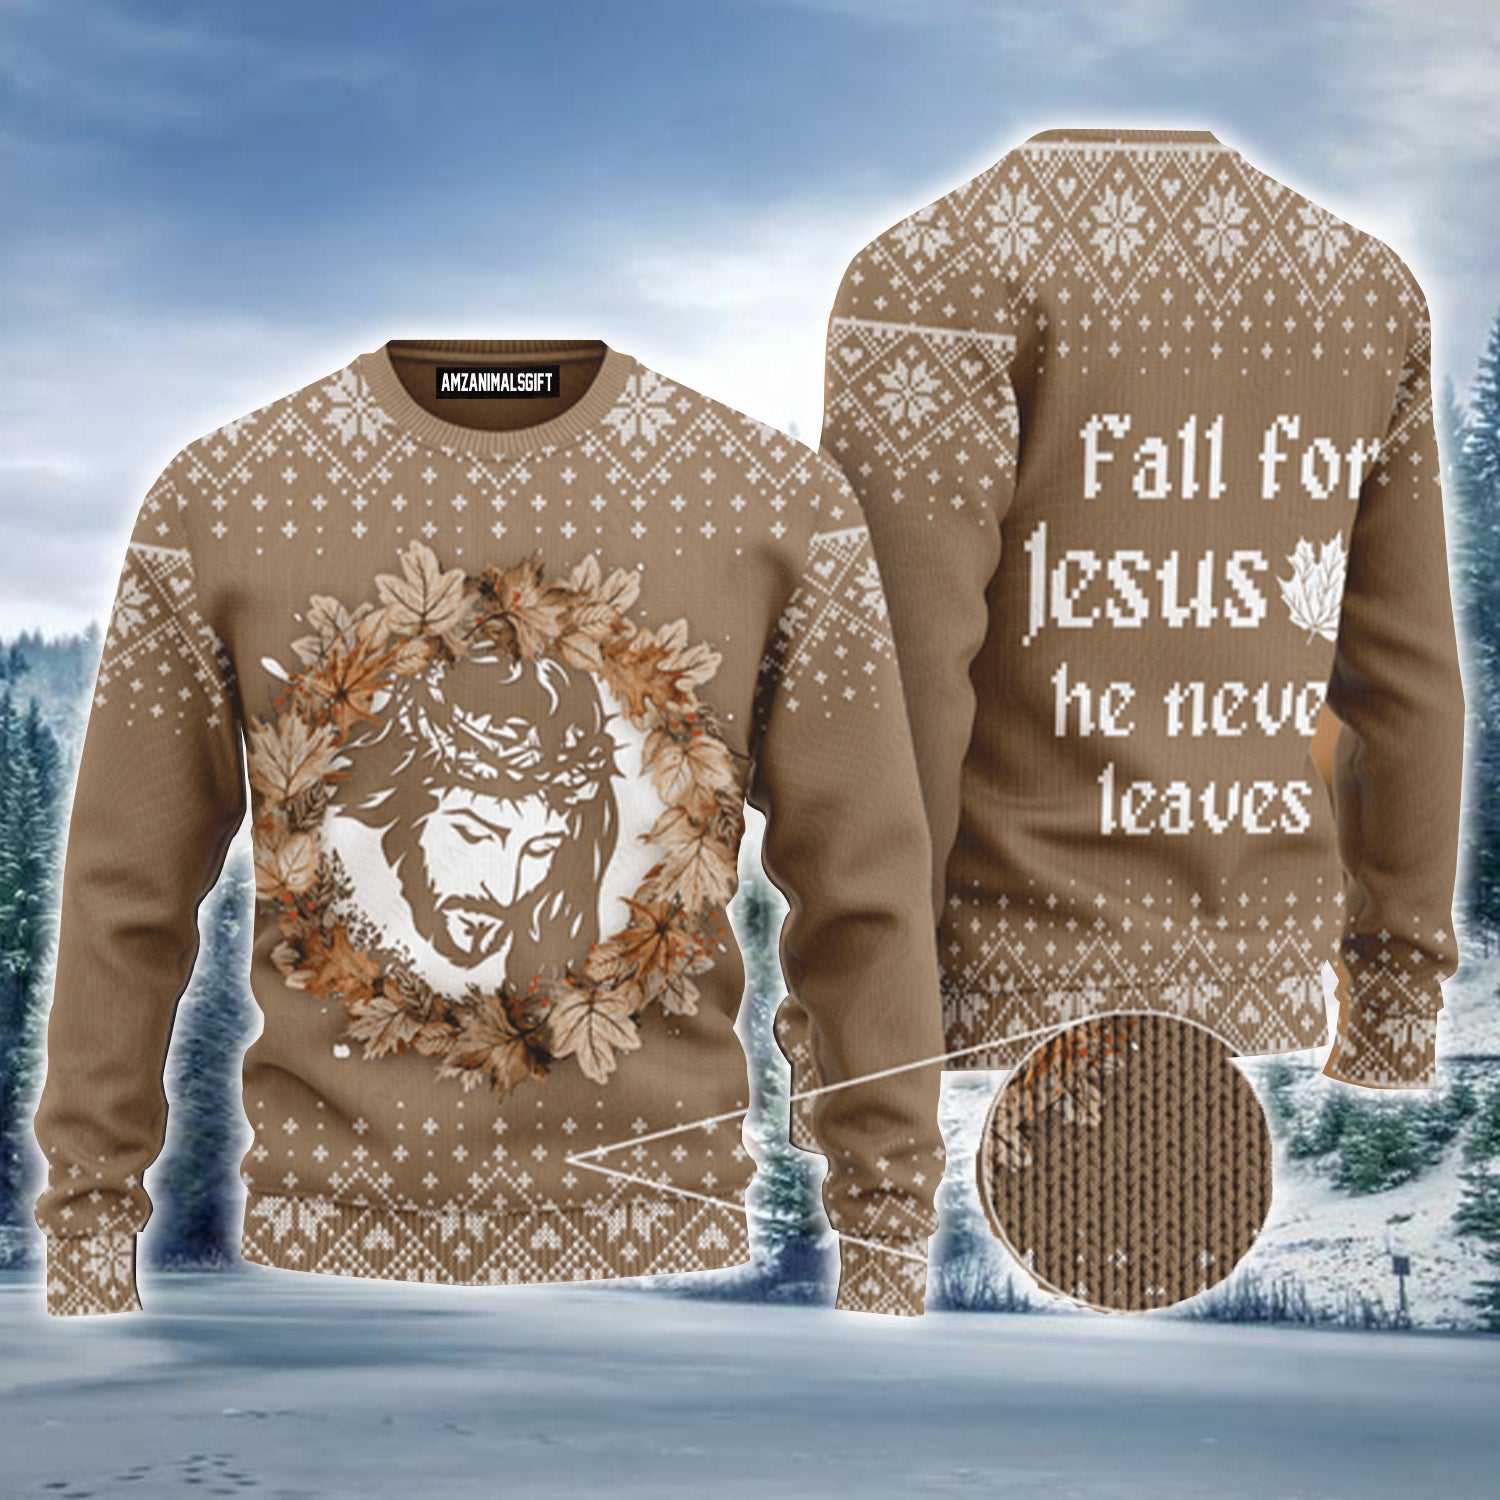 Jesus Christ Autumn Maple Flower Urly Sweater, Christmas Sweater For Men & Women - Perfect Gift For New Year, Winter, Christmas